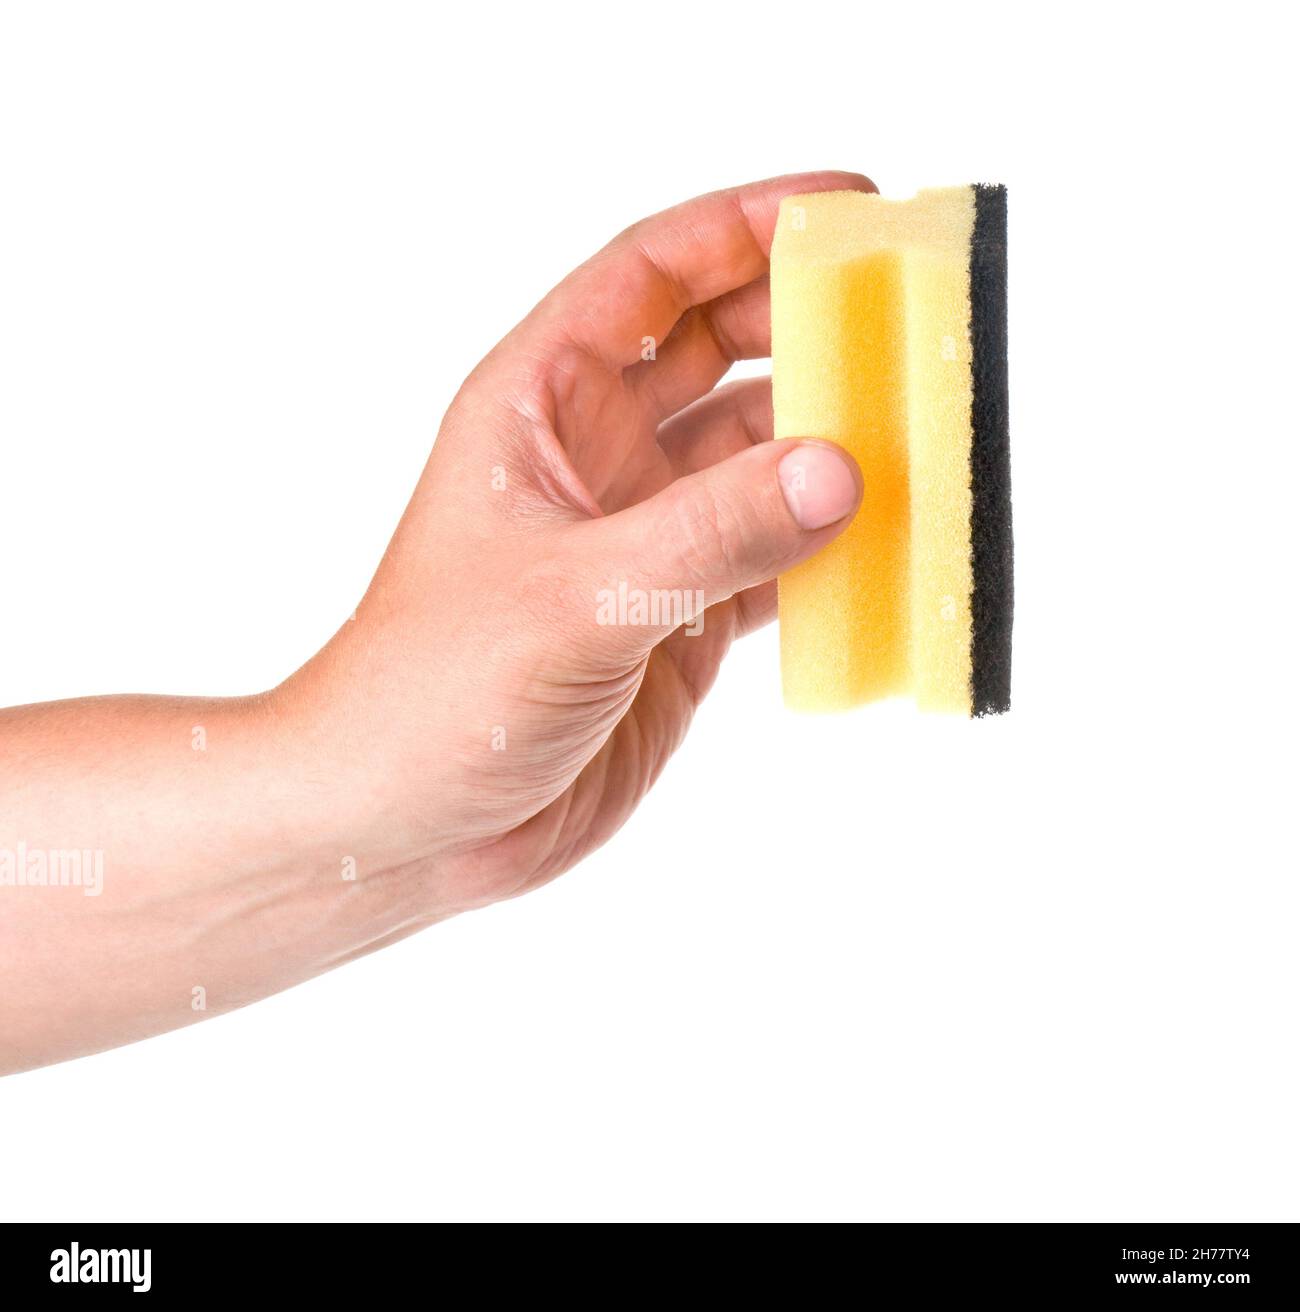 hand with a sponge on a white background Stock Photo